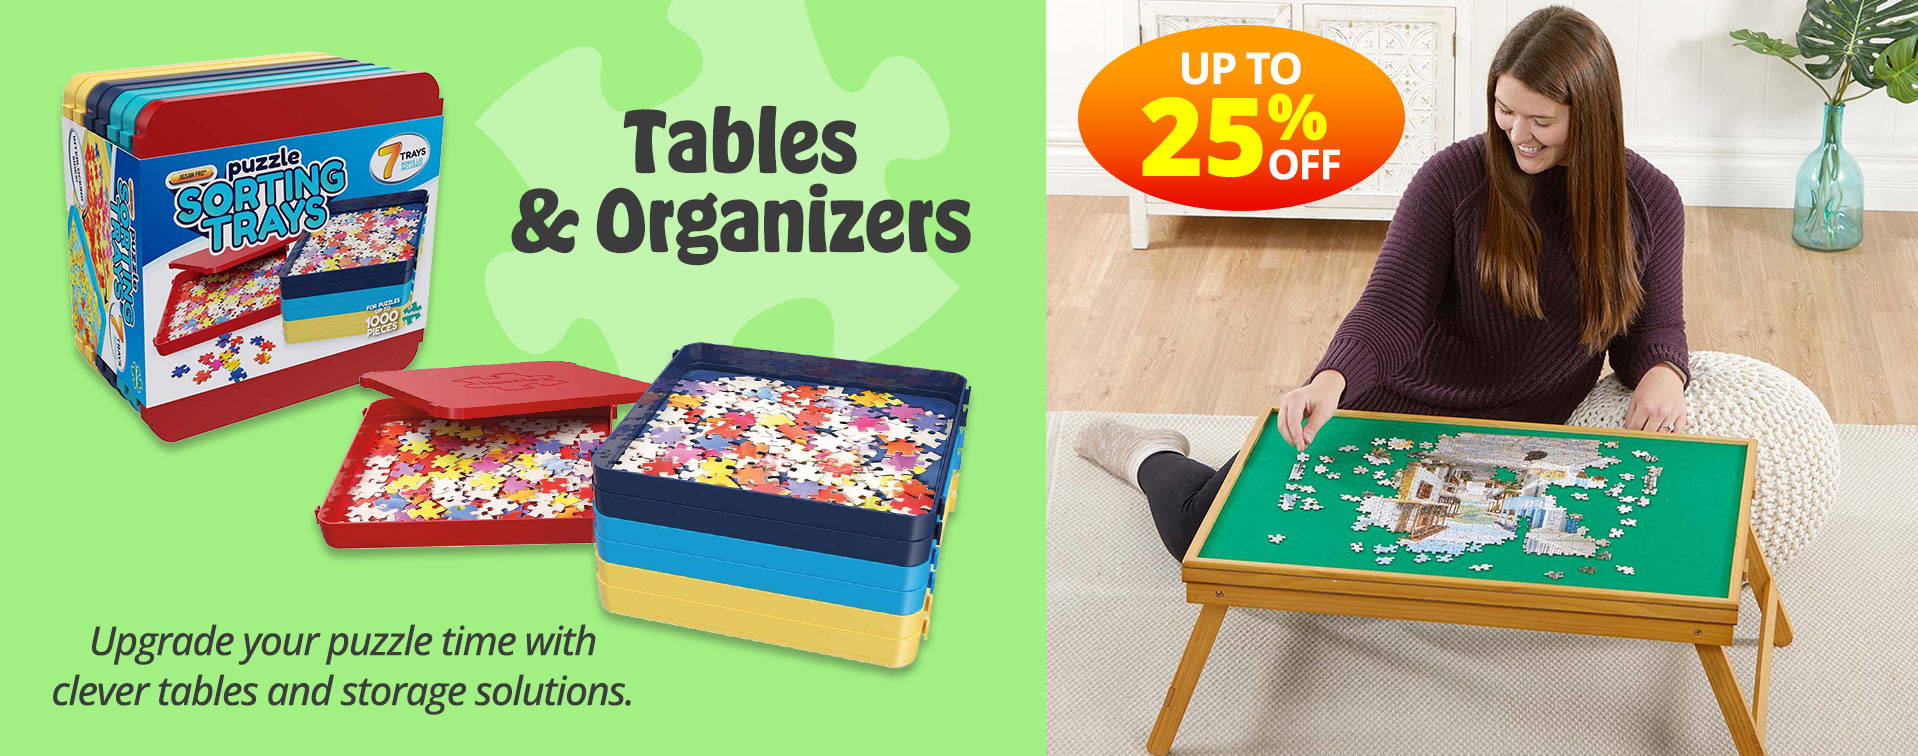 Tables & Organizers. Create the perfect puzzling space with clever tables and storage solutions. 